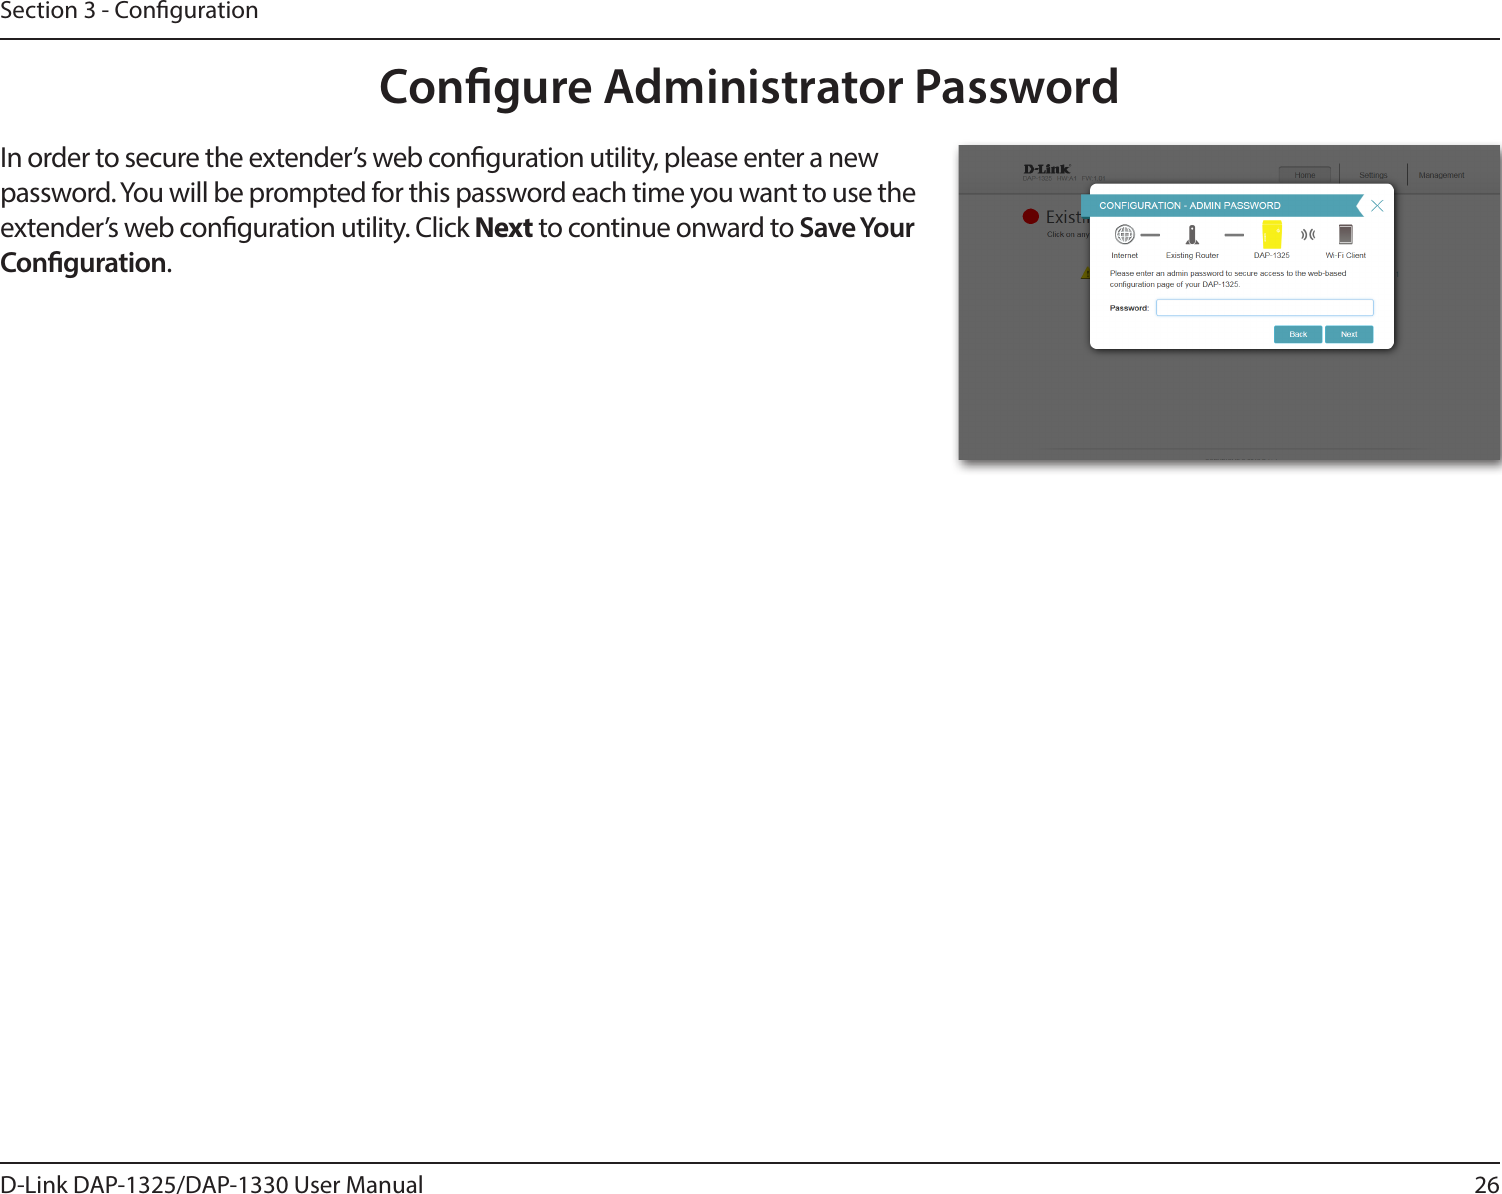 26D-Link DAP-1325/DAP-1330 User ManualSection 3 - CongurationCongure Administrator PasswordIn order to secure the extender’s web conguration utility, please enter a new password. You will be prompted for this password each time you want to use the extender’s web conguration utility. Click Next to continue onward to Save Your Conguration.